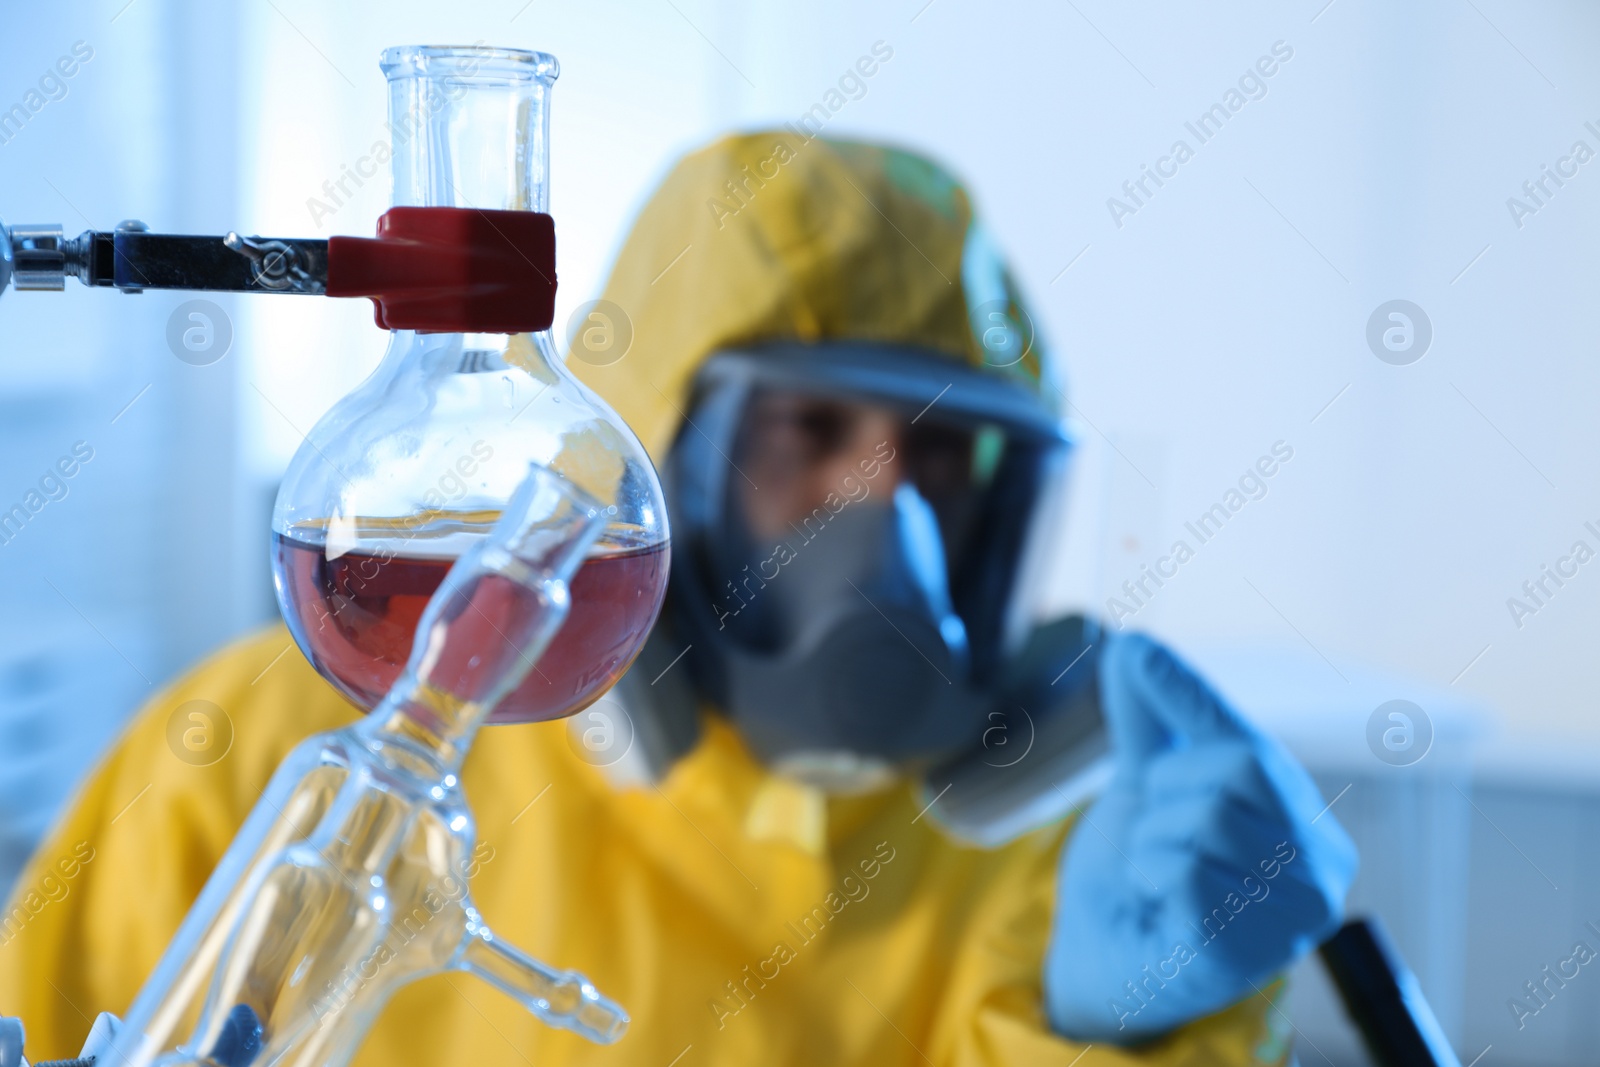 Photo of Flask with reagent and scientist in chemical protective suit working at laboratory. Virus research